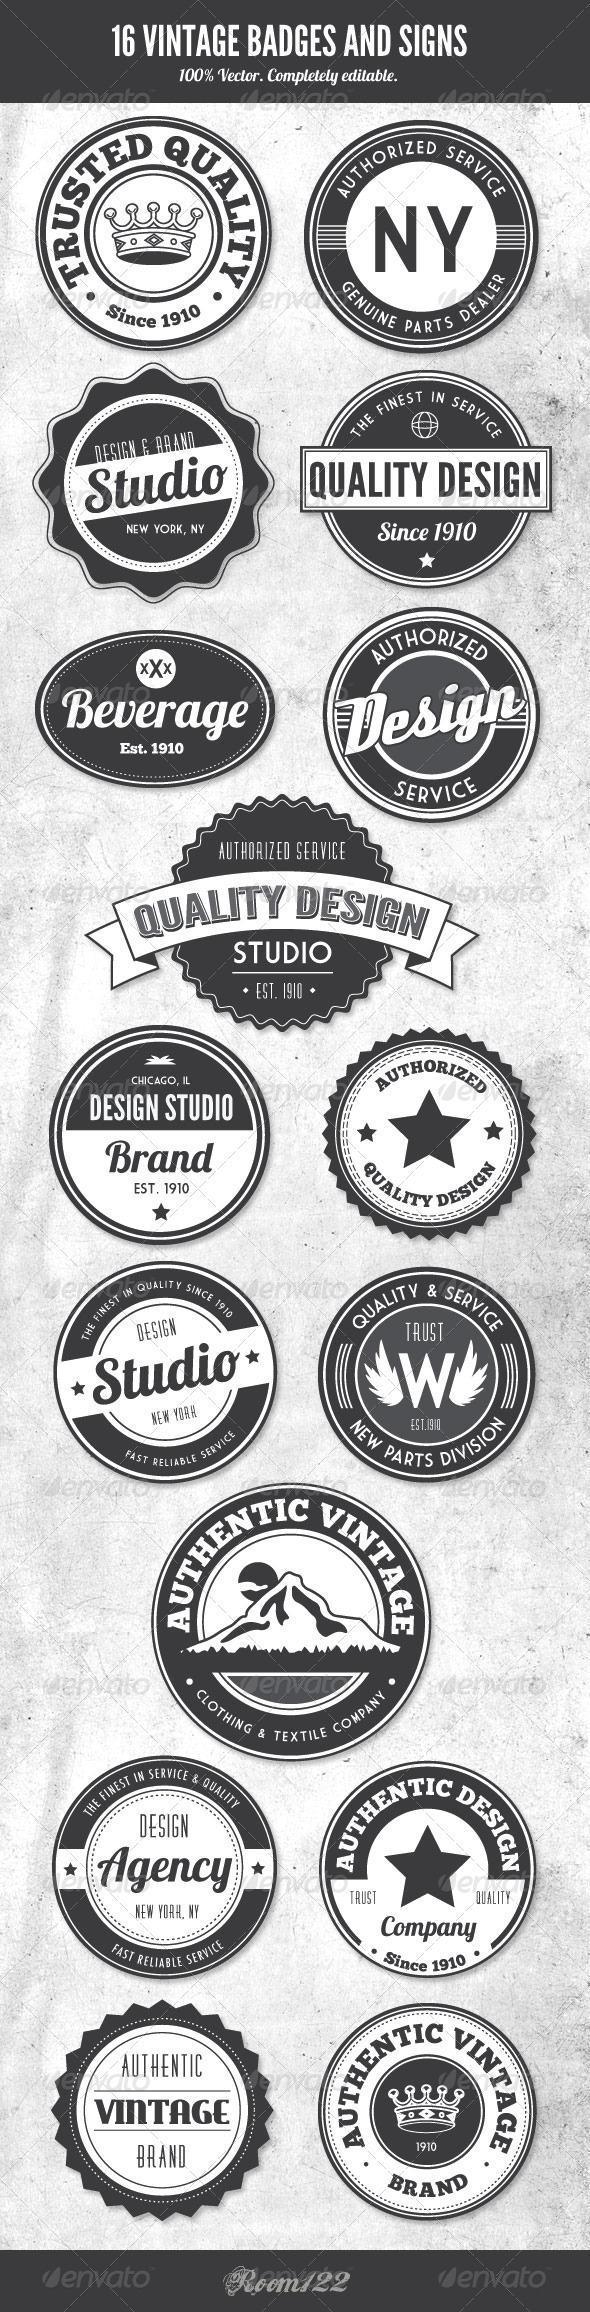 Vintage Logos and Badges